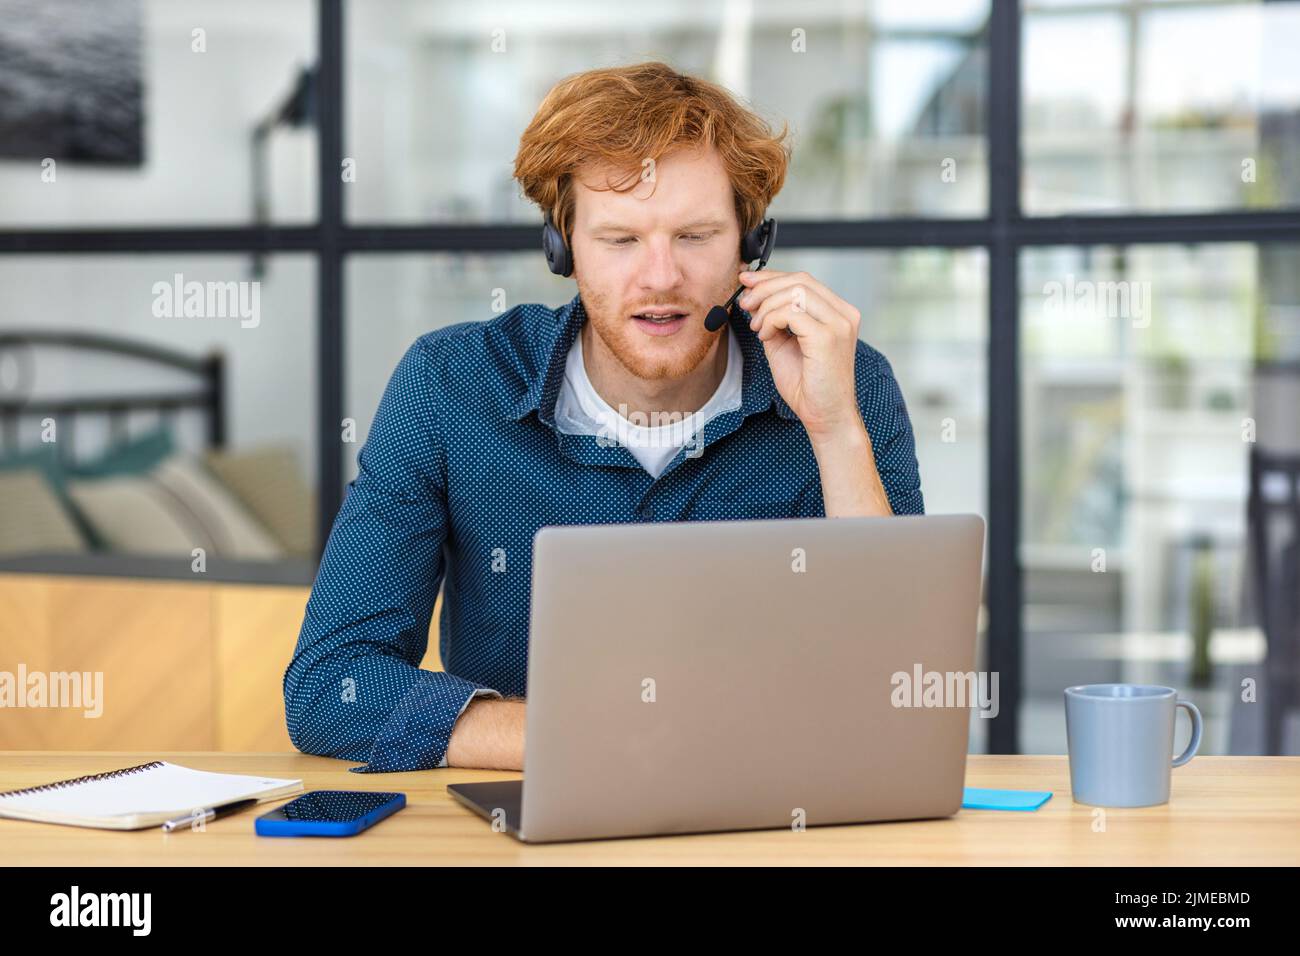 Man customer support call center operator or receptionist in headset consulting client Stock Photo